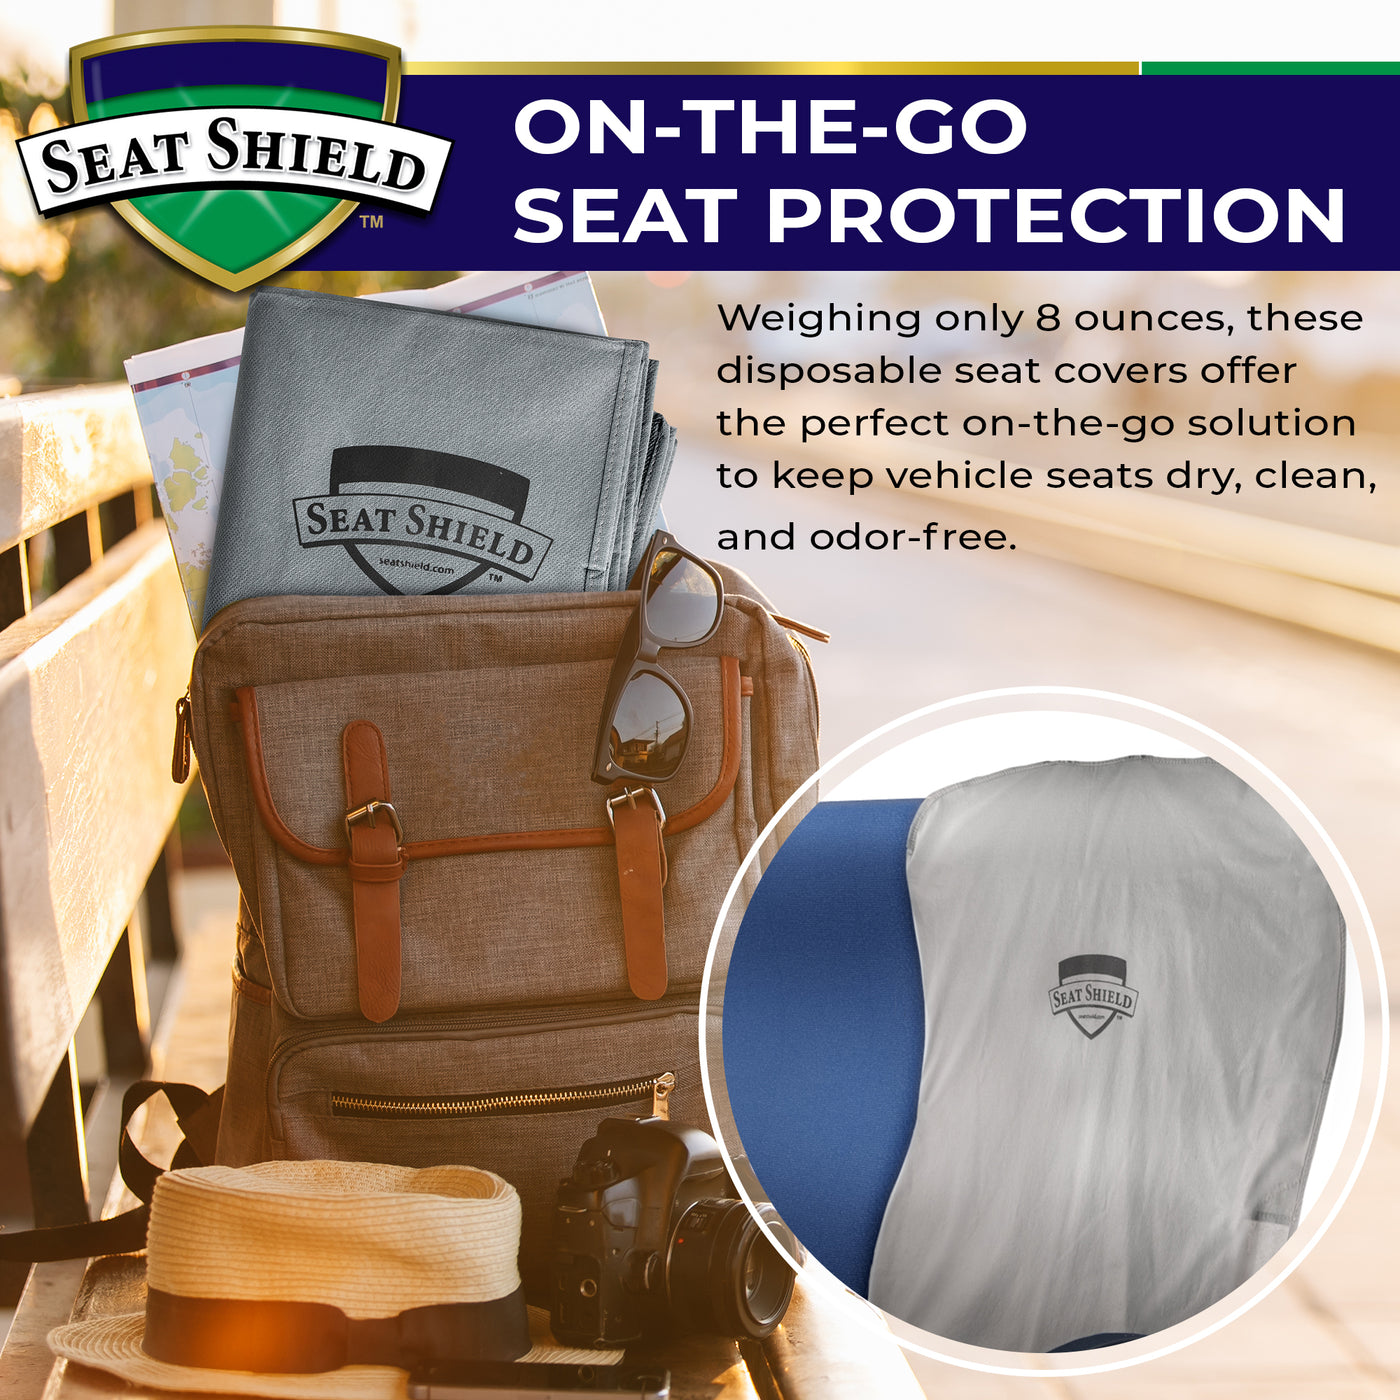 SeatShield Disposable Seat Cover On-The-Go Seat Protection